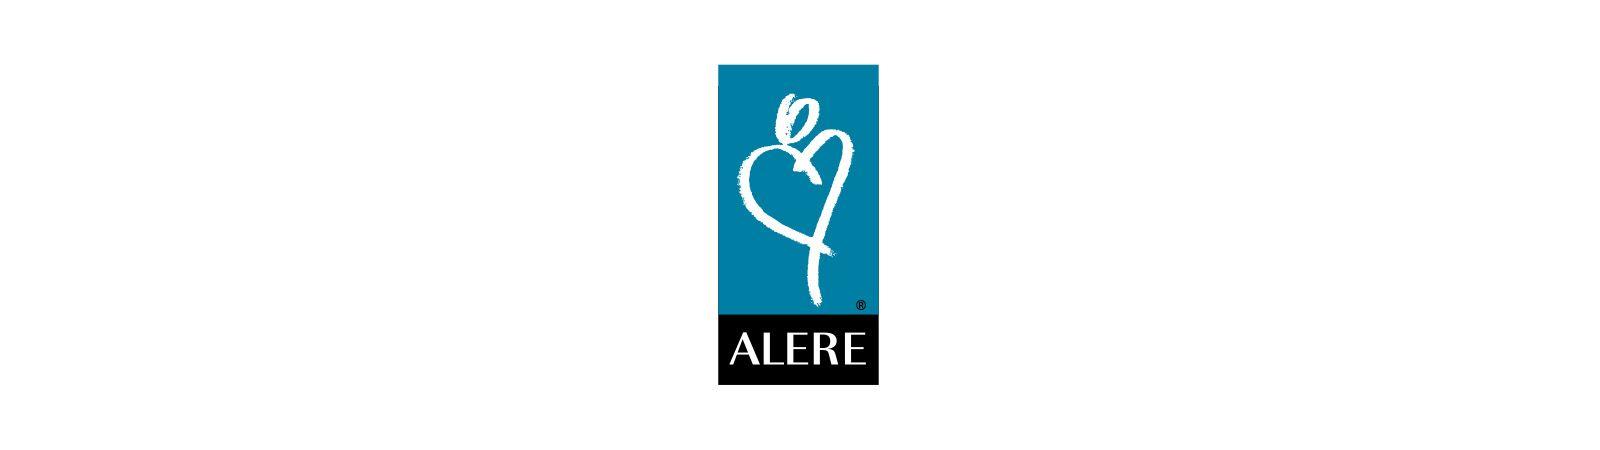 Alere Logo - Alere Medical | Healthcare Sector | TA | A Private Equity Firm